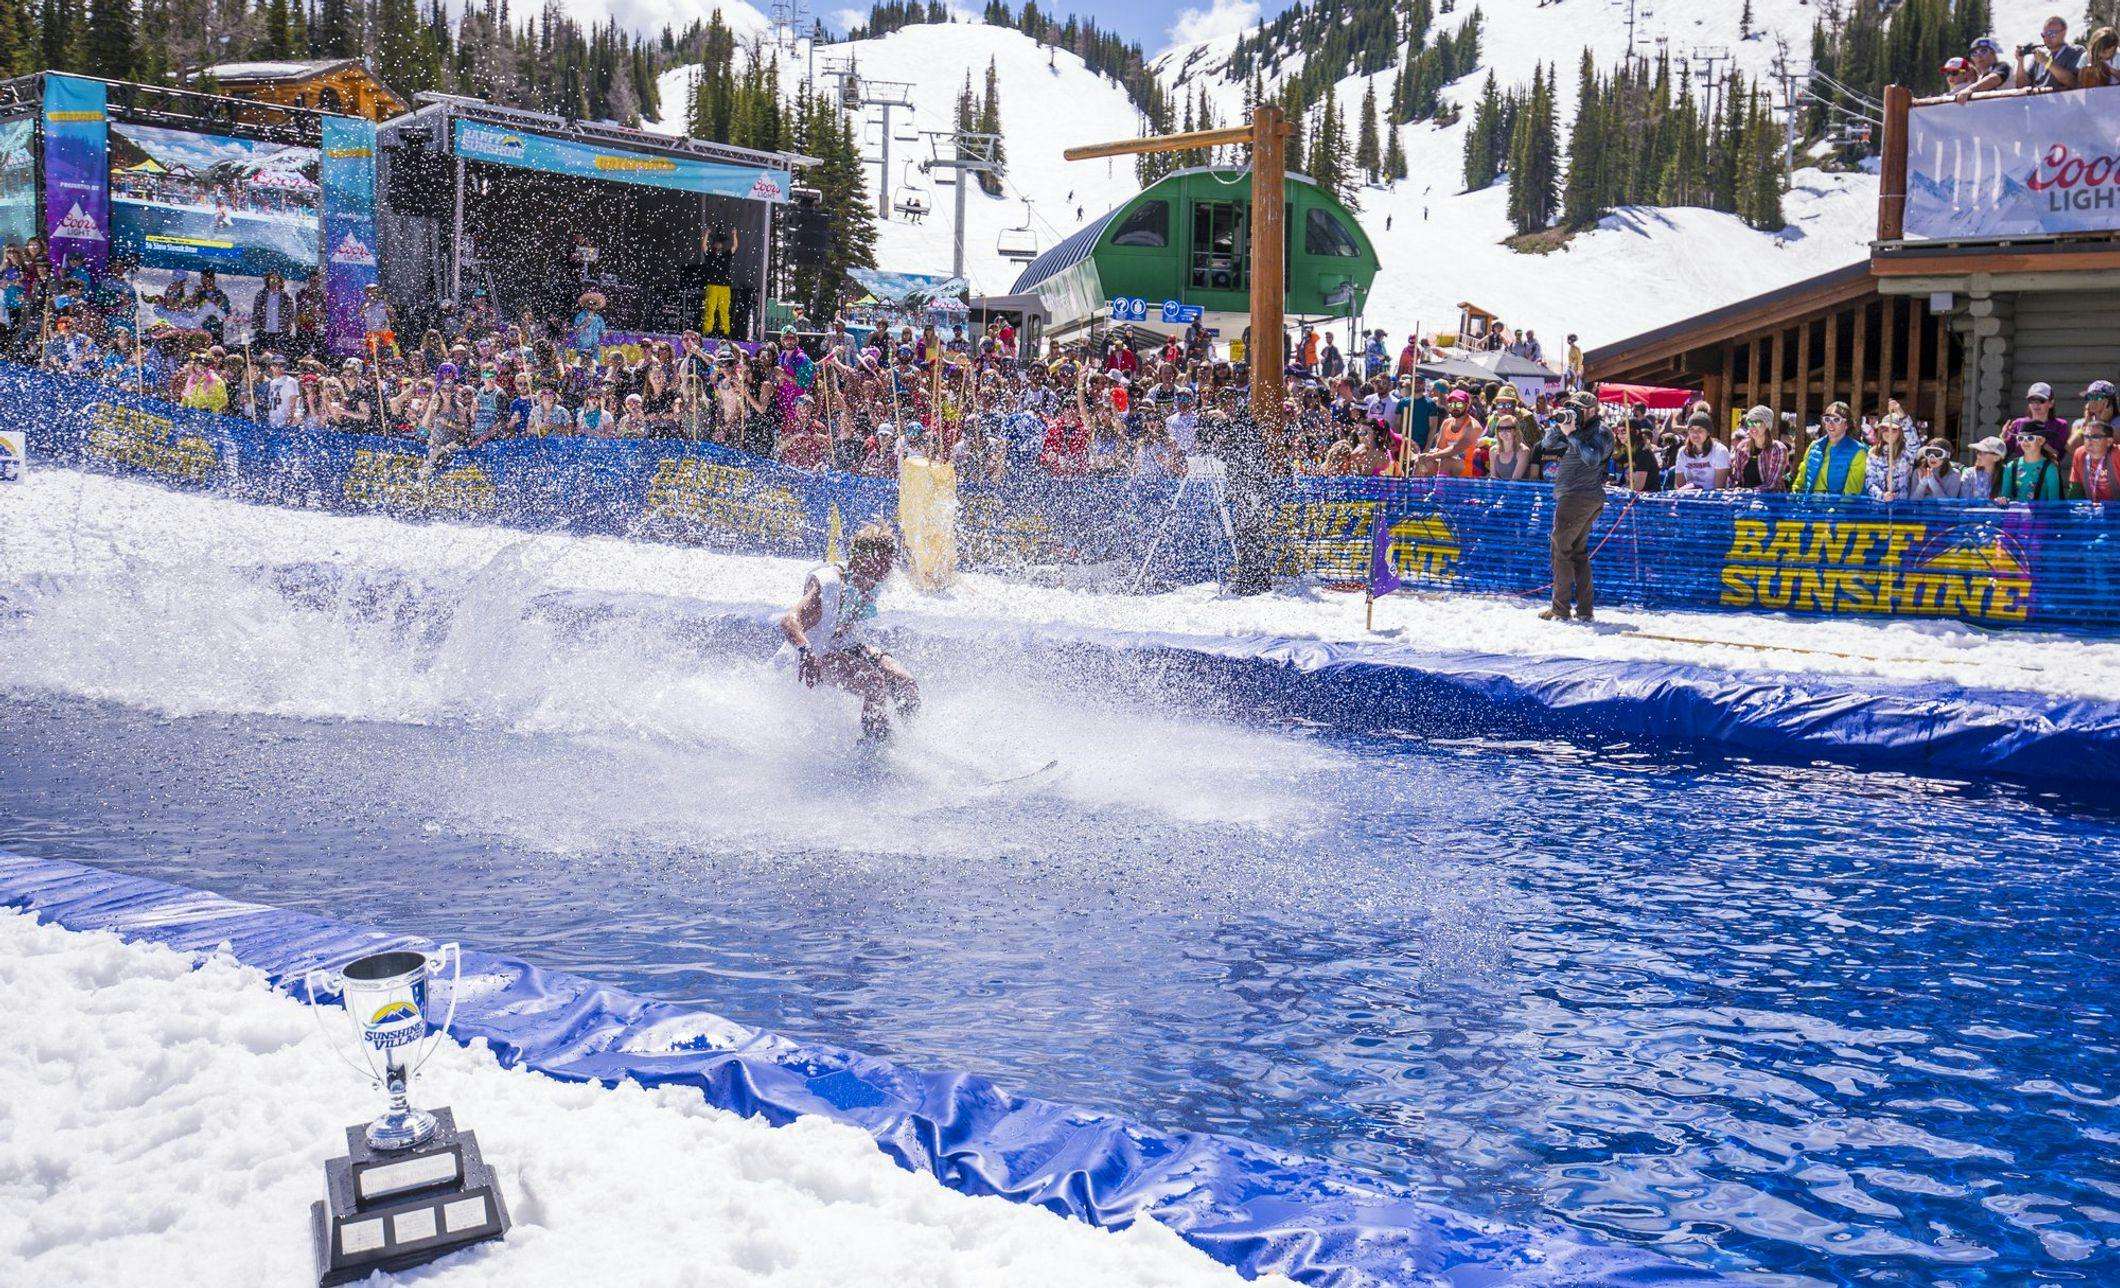 A skier tries to glide across water with a large crowd in the background cheering him on